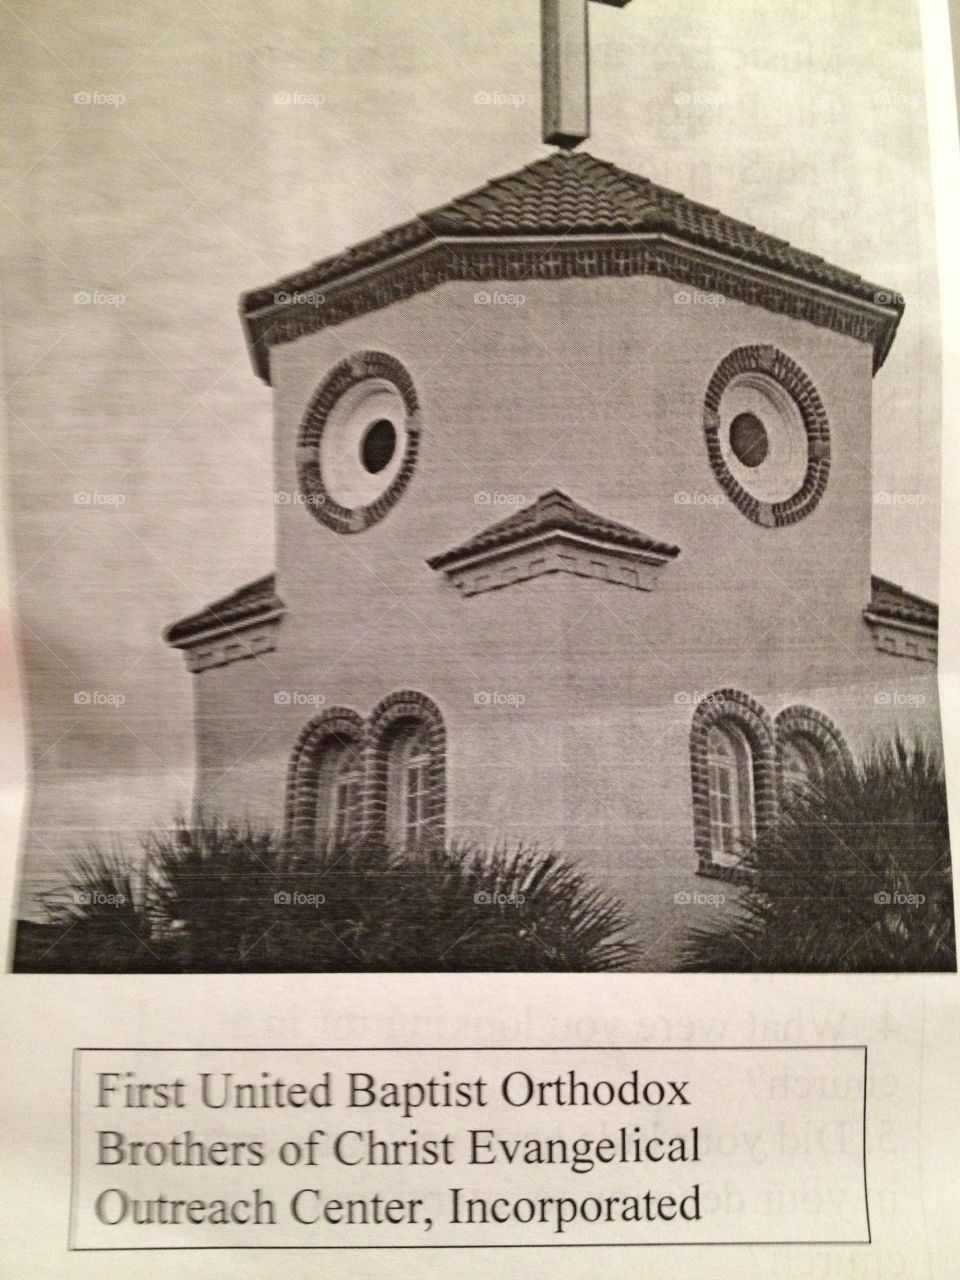 Confused Church. Churches these days.......